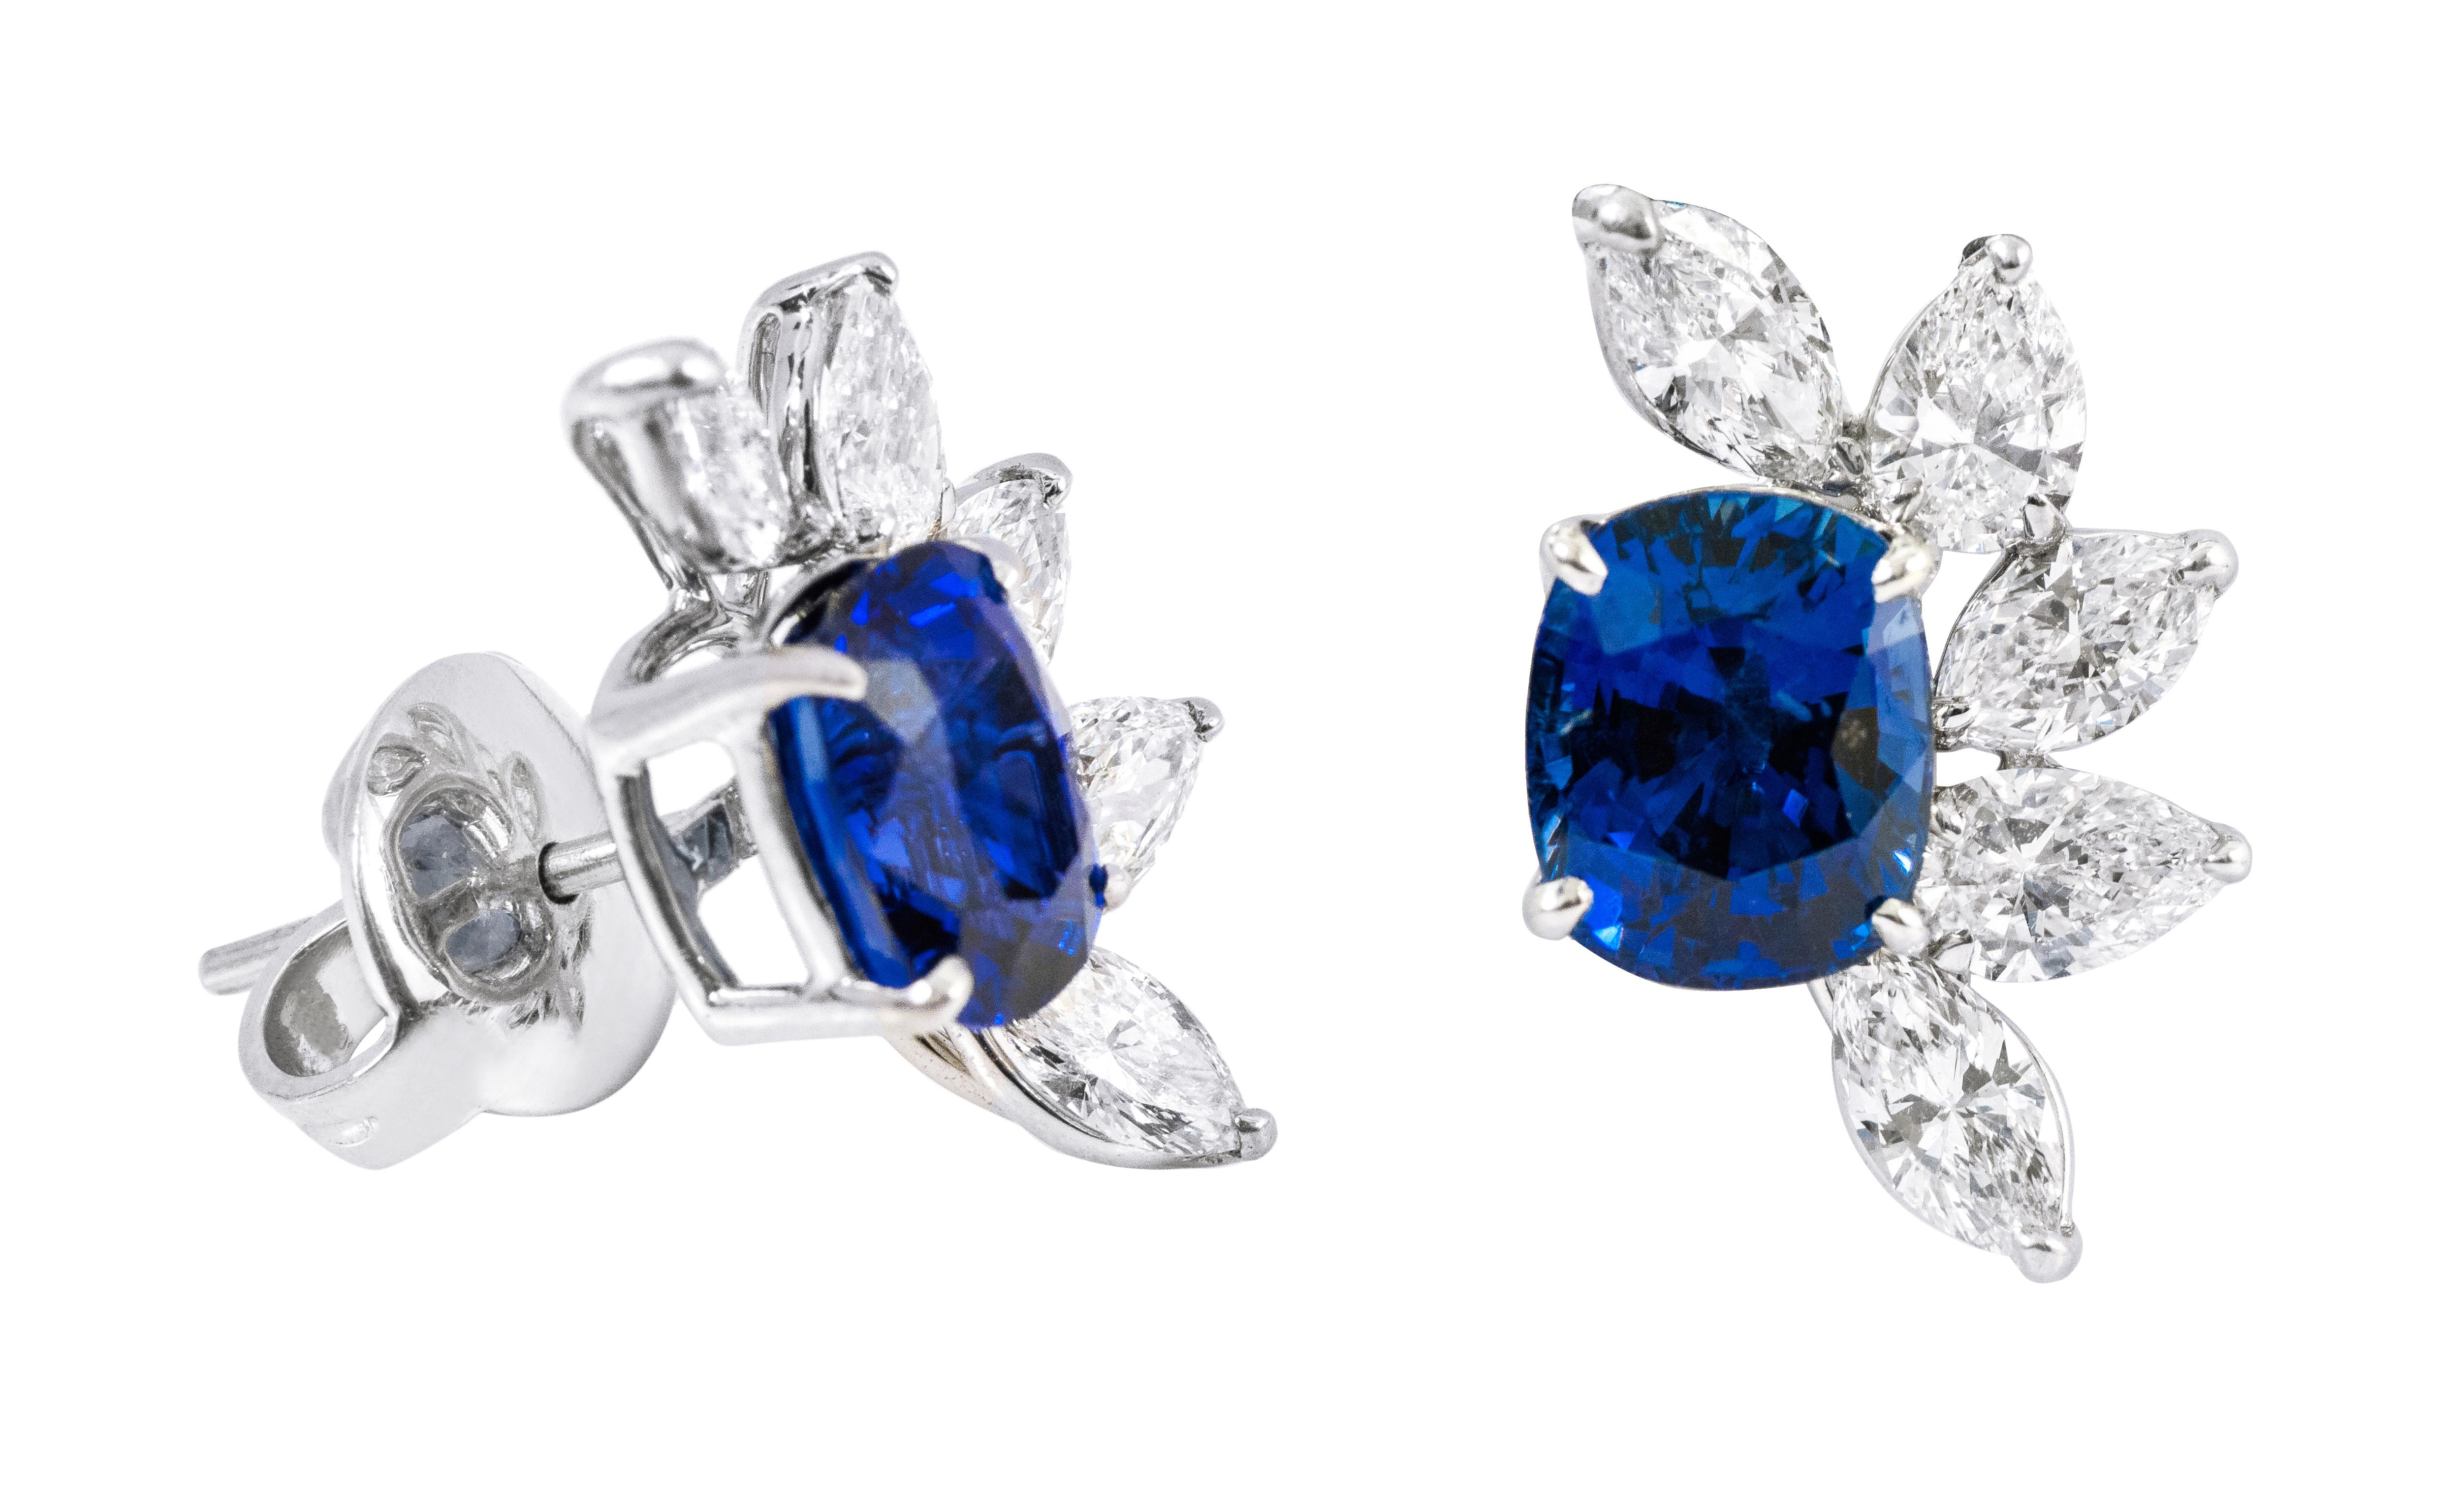 Platinum GIA Certified 10.54 Carats Sapphire and Diamond Cocktail Stud Earrings

This glorious cornflower blue sapphire and diamond earring is magnificent. The exquisite solitaire cushion cut sapphire with the leveled down solitaire pear-shaped